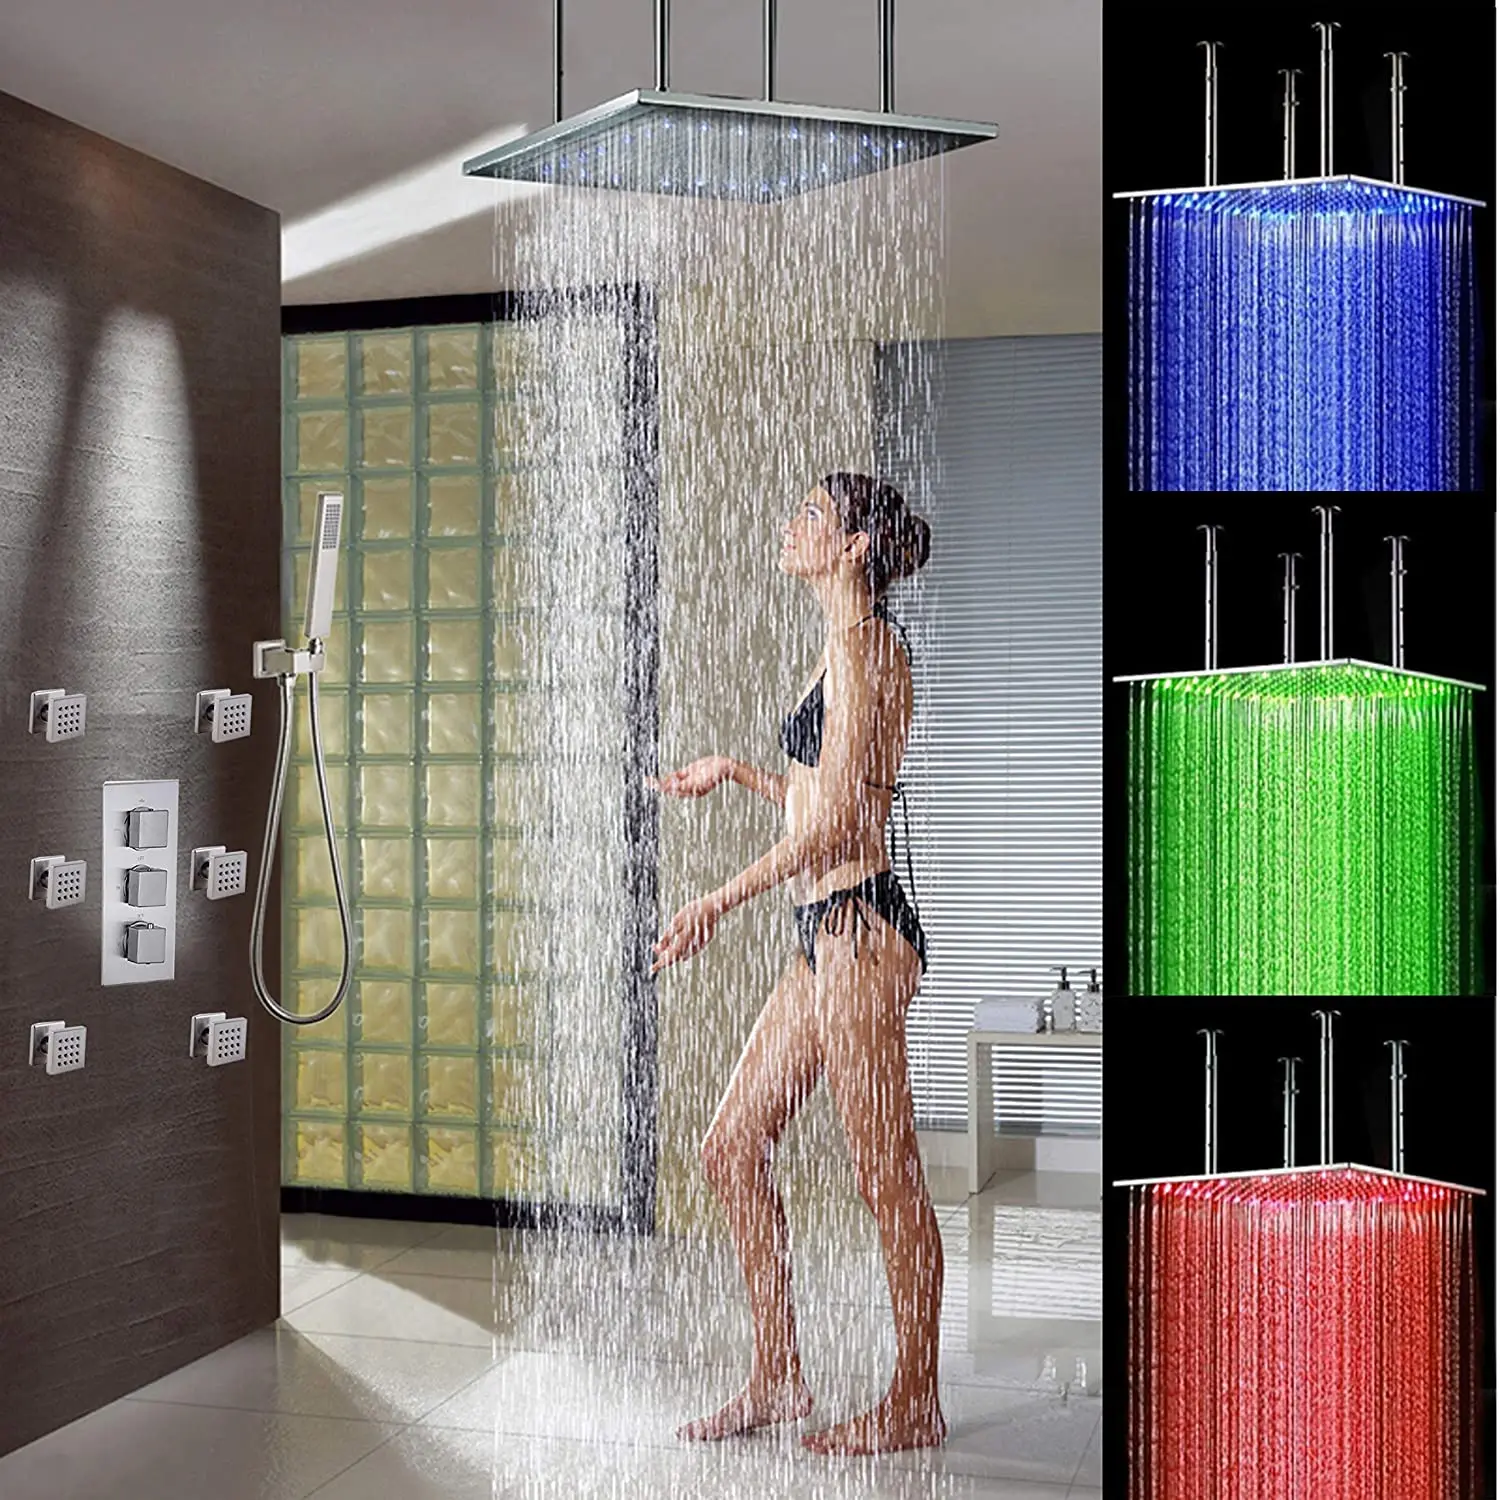 

20inch Large LED Rain Shower Head System Brushed Nickel Bathroom Brass Thermostatic Shower Set with Body Sprayer Jets